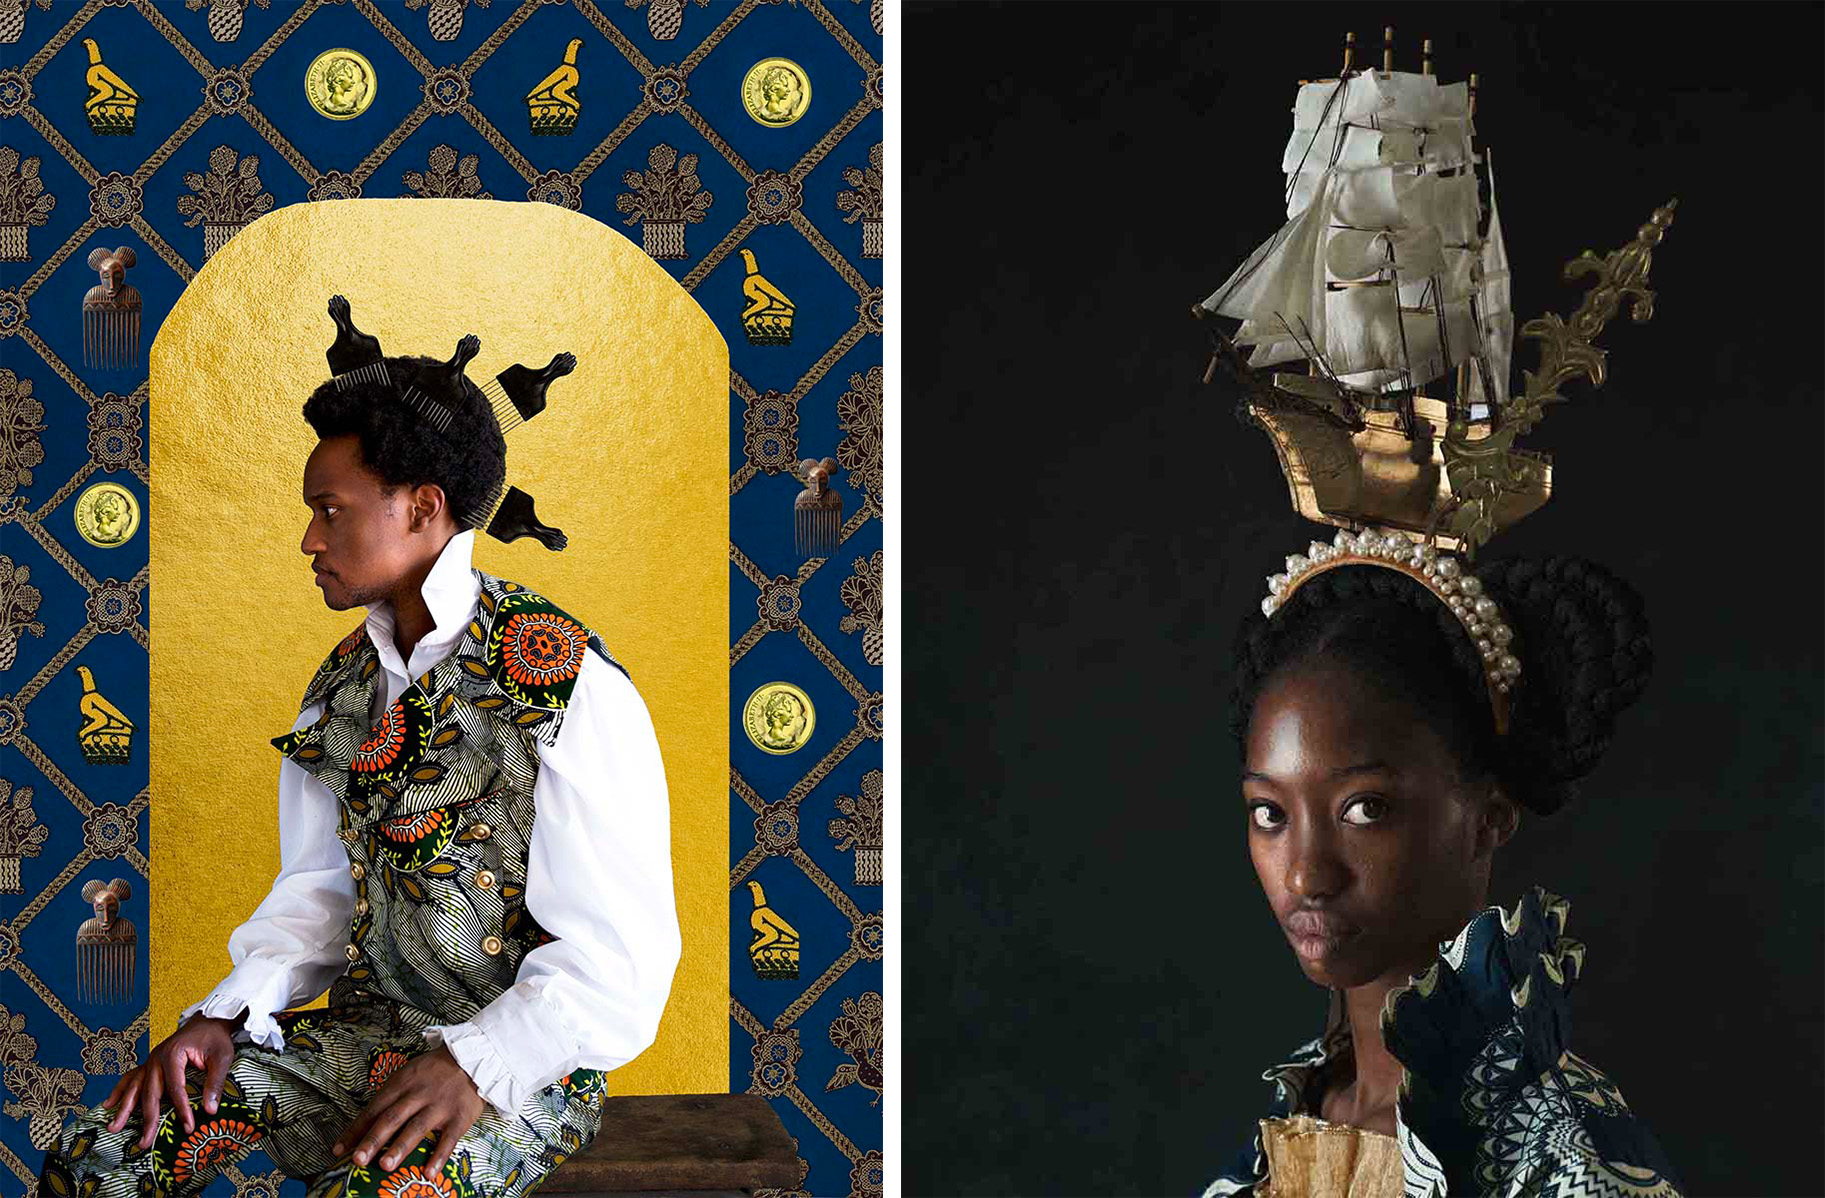 two side-by-side images of portraits of Black figures; on the left, a man sits in profile with a white shirt and patterned vest with hair picks in his hair; on the right, a woman wears an elaborate headdress shaped like a wooden ship